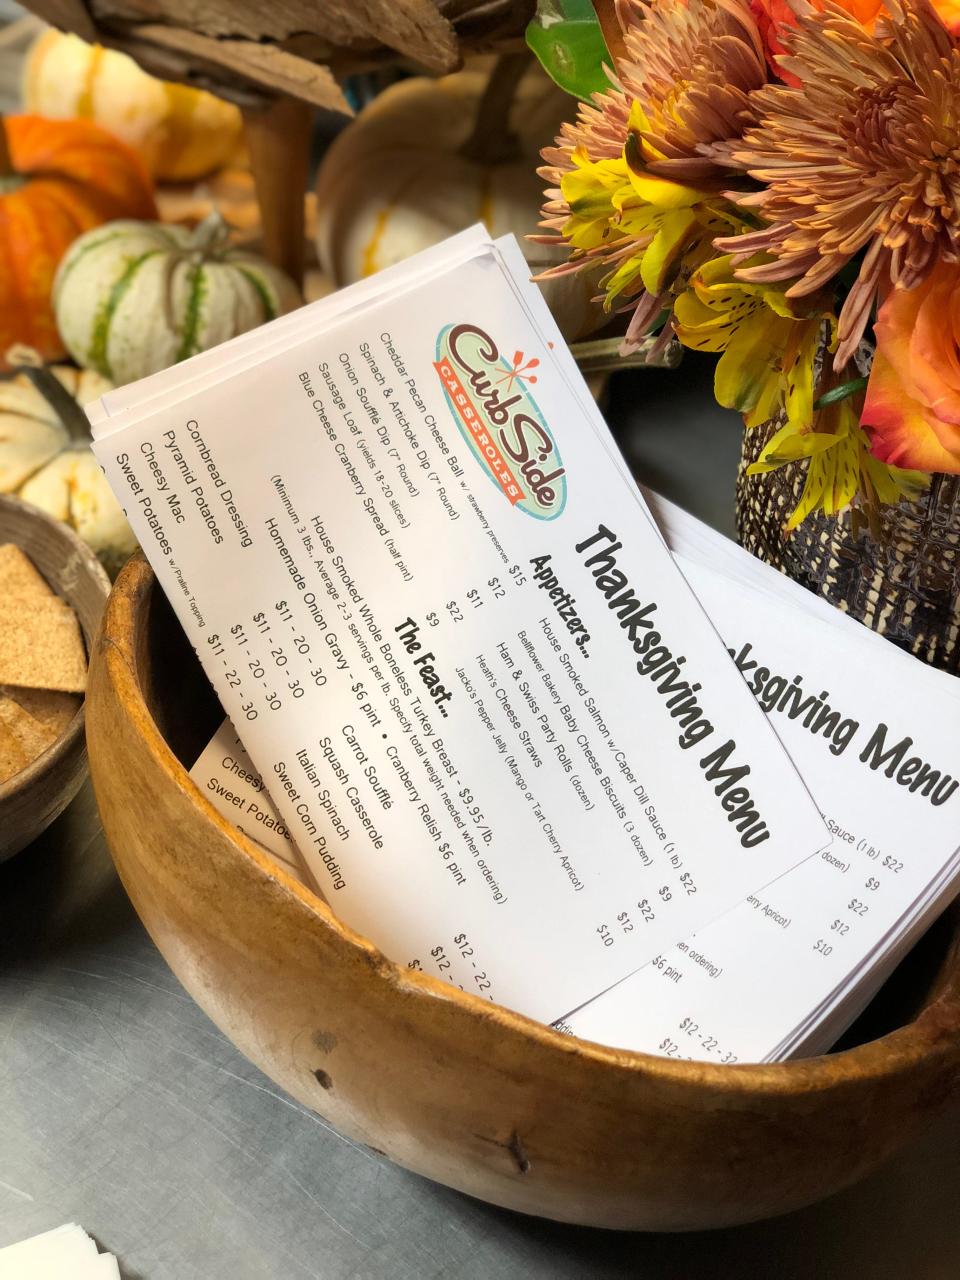 Curb Side Casseroles offers a wide selection of appetizers and sides to help make your Thanksgiving meal stress-free as well.